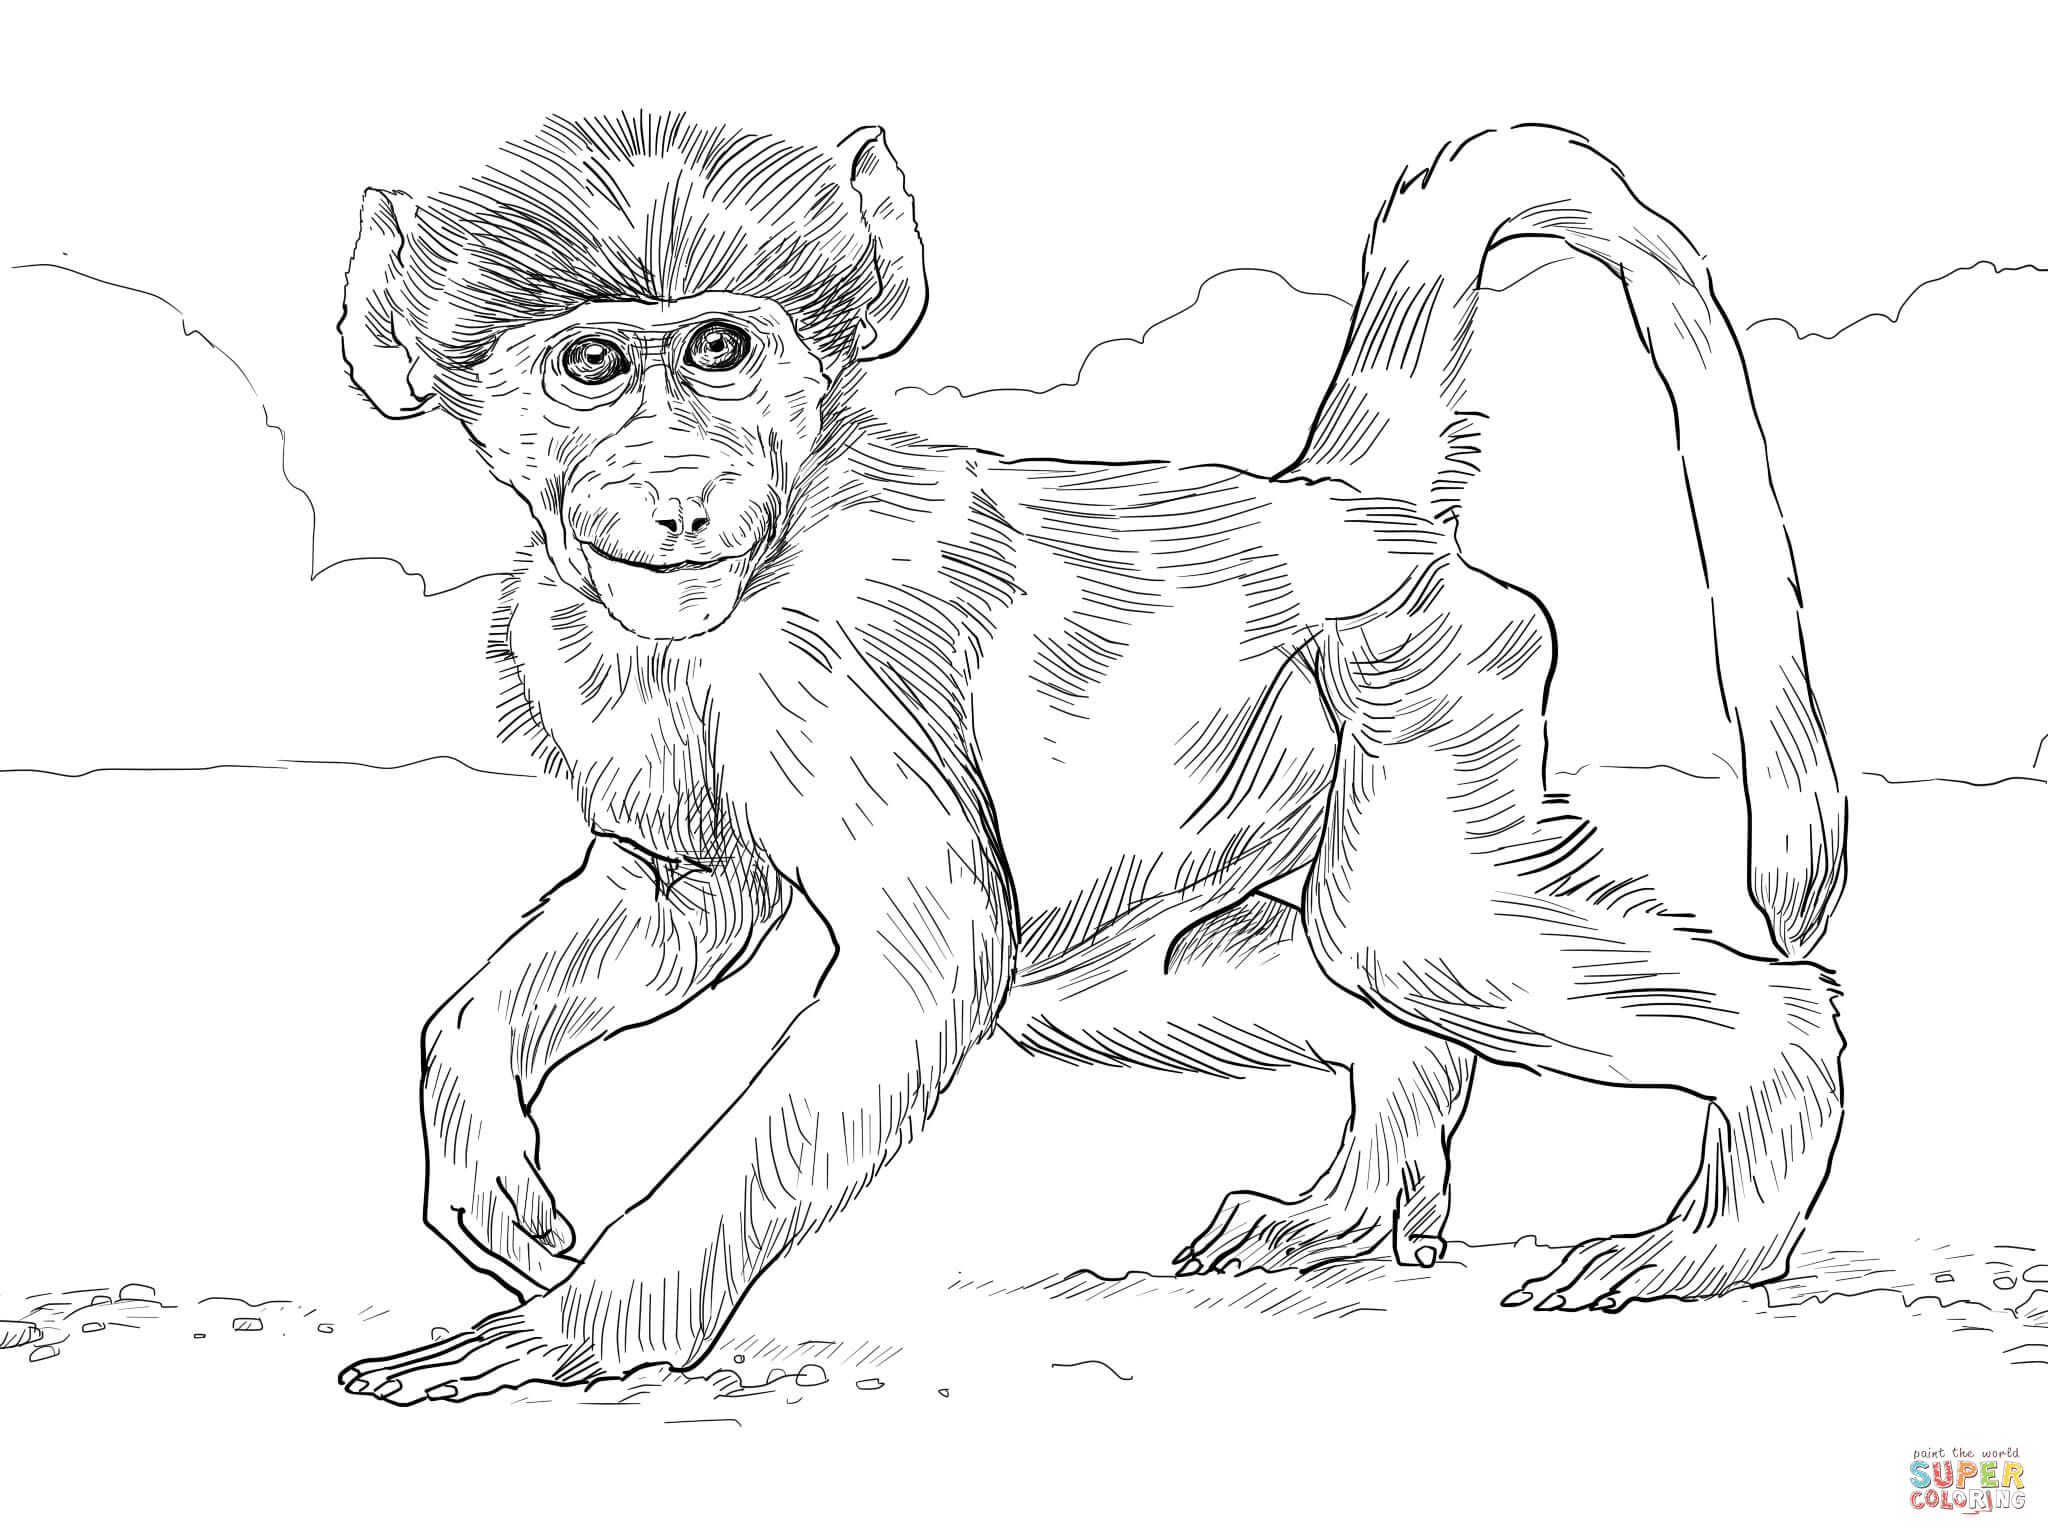 Monkeys coloring pages | Free Coloring Pages